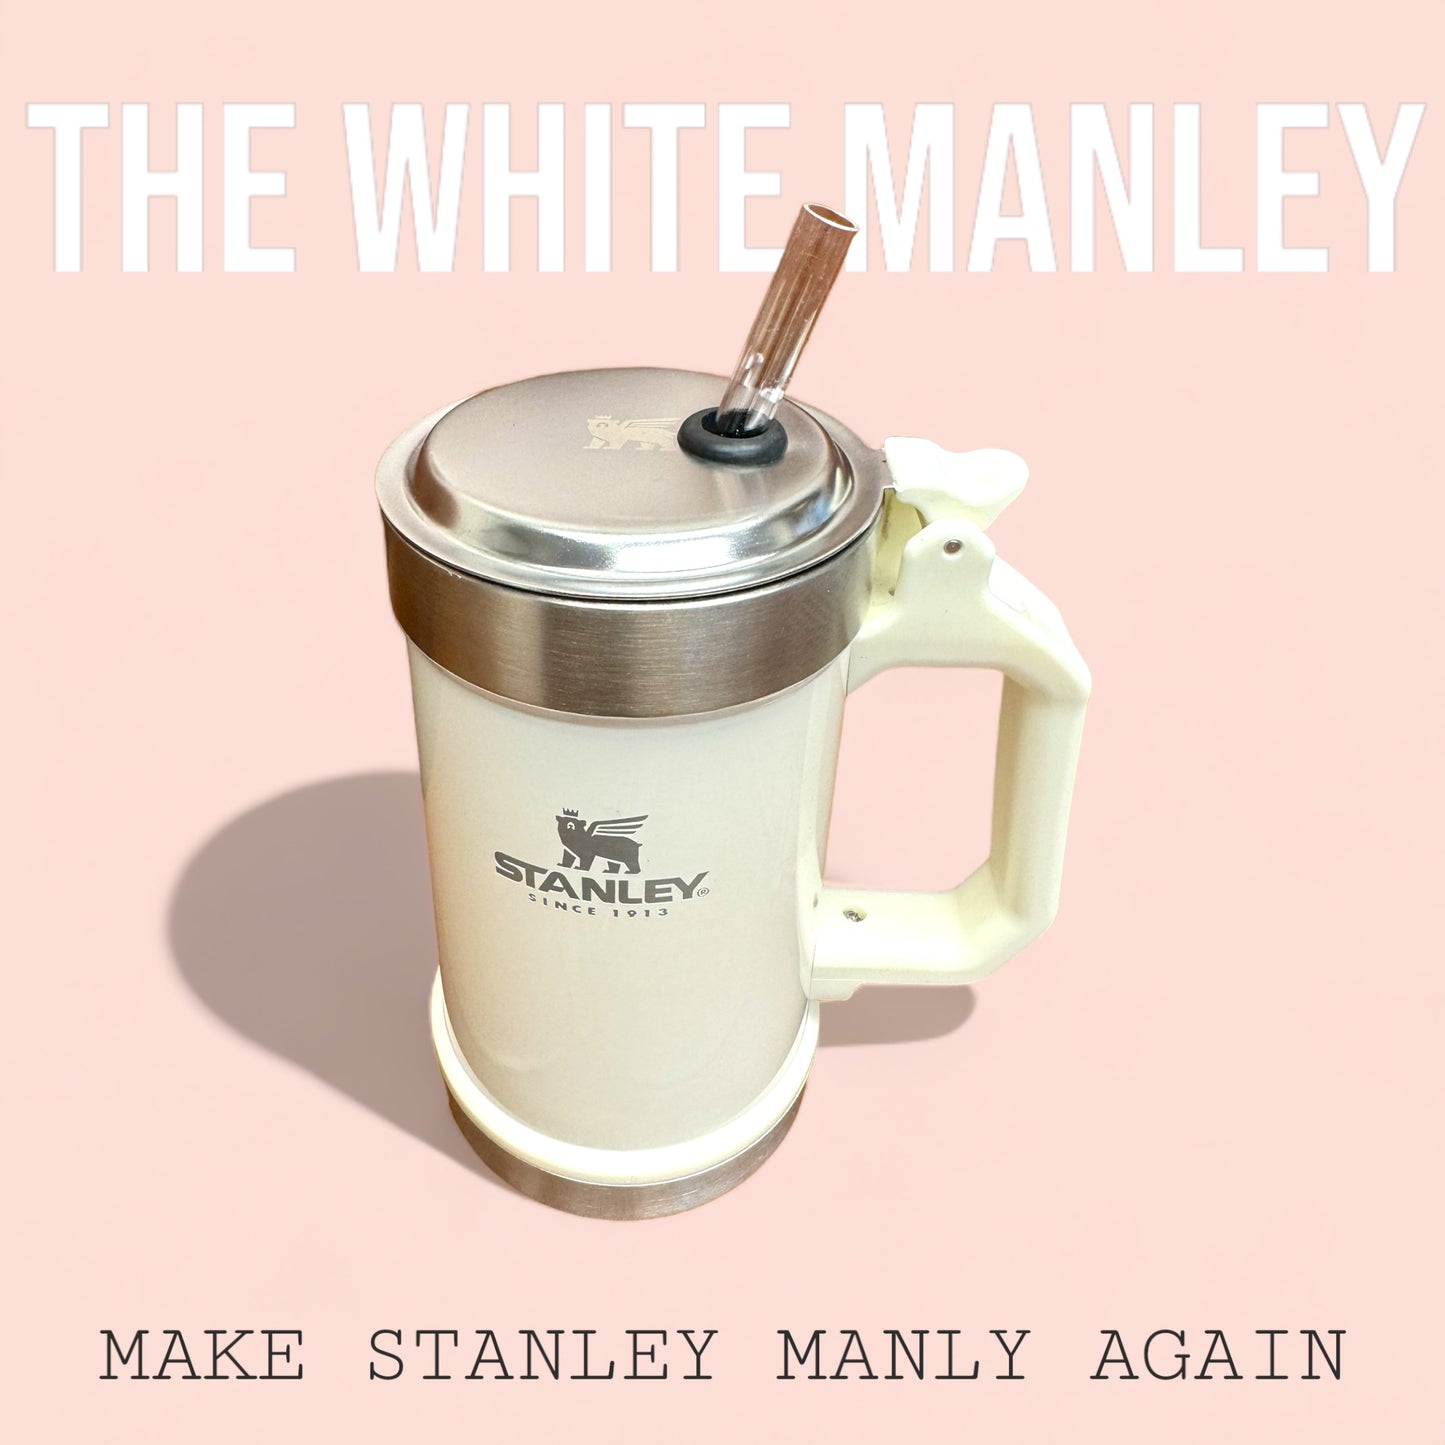 The White Manley